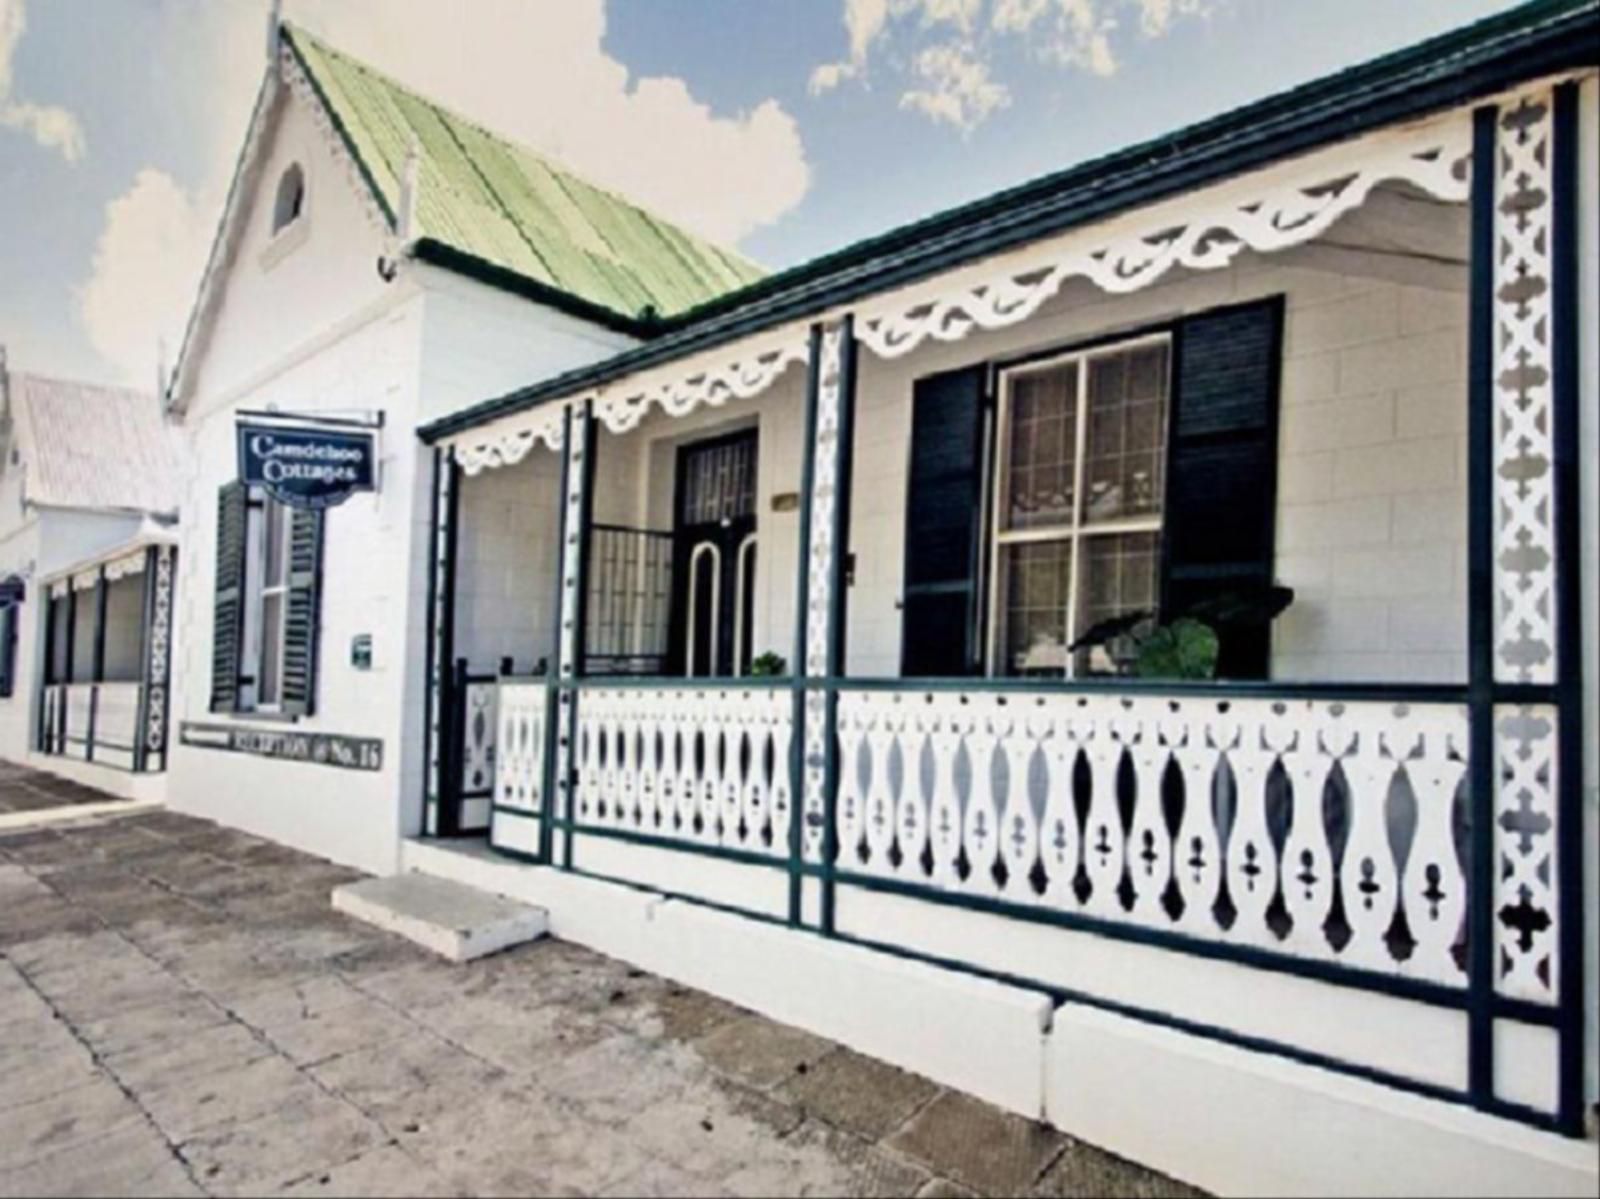 Camdeboo Cottages Graaff Reinet Eastern Cape South Africa House, Building, Architecture